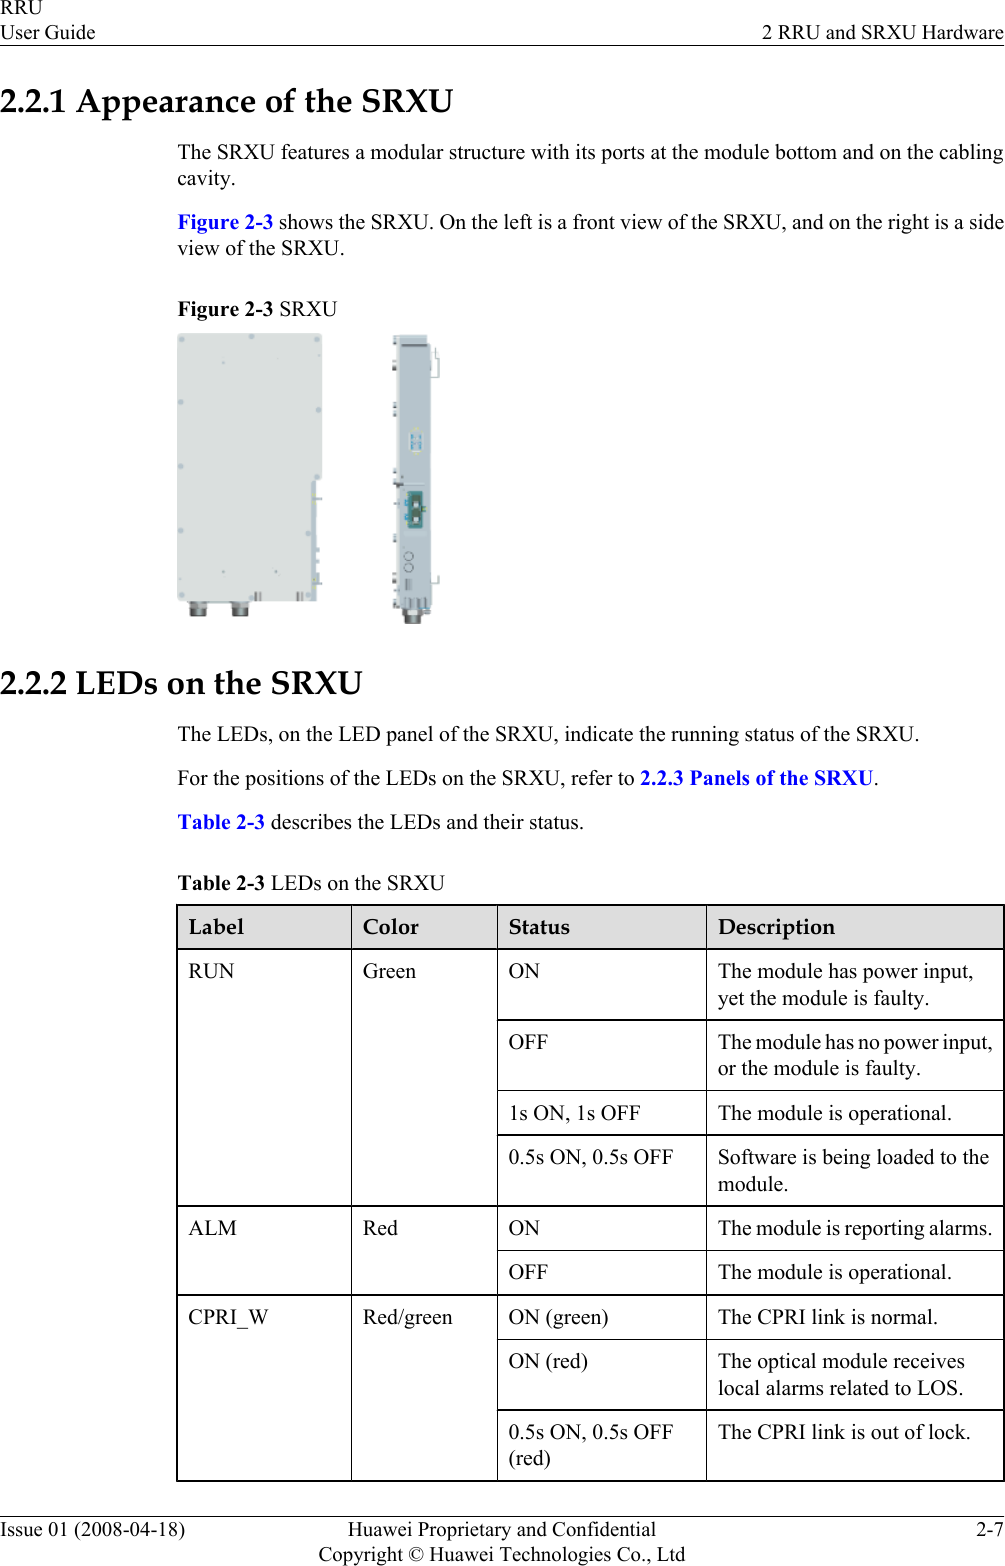 2.2.1 Appearance of the SRXUThe SRXU features a modular structure with its ports at the module bottom and on the cablingcavity.Figure 2-3 shows the SRXU. On the left is a front view of the SRXU, and on the right is a sideview of the SRXU.Figure 2-3 SRXU2.2.2 LEDs on the SRXUThe LEDs, on the LED panel of the SRXU, indicate the running status of the SRXU.For the positions of the LEDs on the SRXU, refer to 2.2.3 Panels of the SRXU.Table 2-3 describes the LEDs and their status.Table 2-3 LEDs on the SRXULabel Color Status DescriptionRUN Green ON The module has power input,yet the module is faulty.OFF The module has no power input,or the module is faulty.1s ON, 1s OFF The module is operational.0.5s ON, 0.5s OFF Software is being loaded to themodule.ALM Red ON The module is reporting alarms.OFF The module is operational.CPRI_W Red/green ON (green) The CPRI link is normal.ON (red) The optical module receiveslocal alarms related to LOS.0.5s ON, 0.5s OFF(red)The CPRI link is out of lock.RRUUser Guide 2 RRU and SRXU HardwareIssue 01 (2008-04-18) Huawei Proprietary and ConfidentialCopyright © Huawei Technologies Co., Ltd2-7